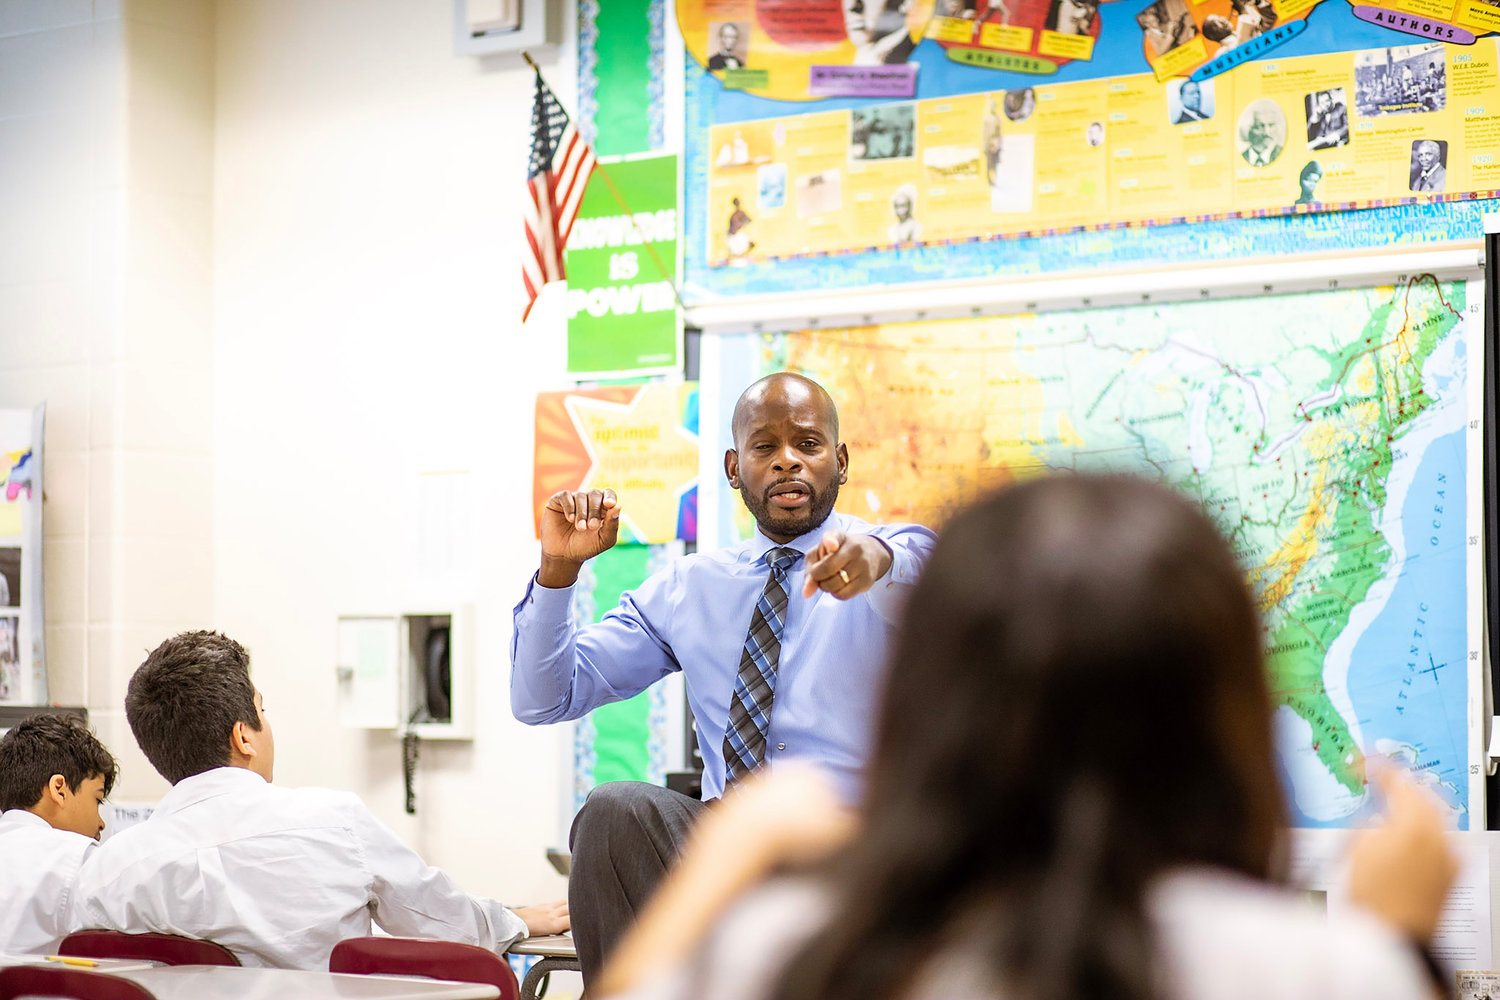 Michael Simmon teaches eighth grade U.S. history at IN-Tech Academy on Tibbett Avenue. And his classroom — the physical one and the virtual one — is becoming a space where students can discuss racial justice issues as well.